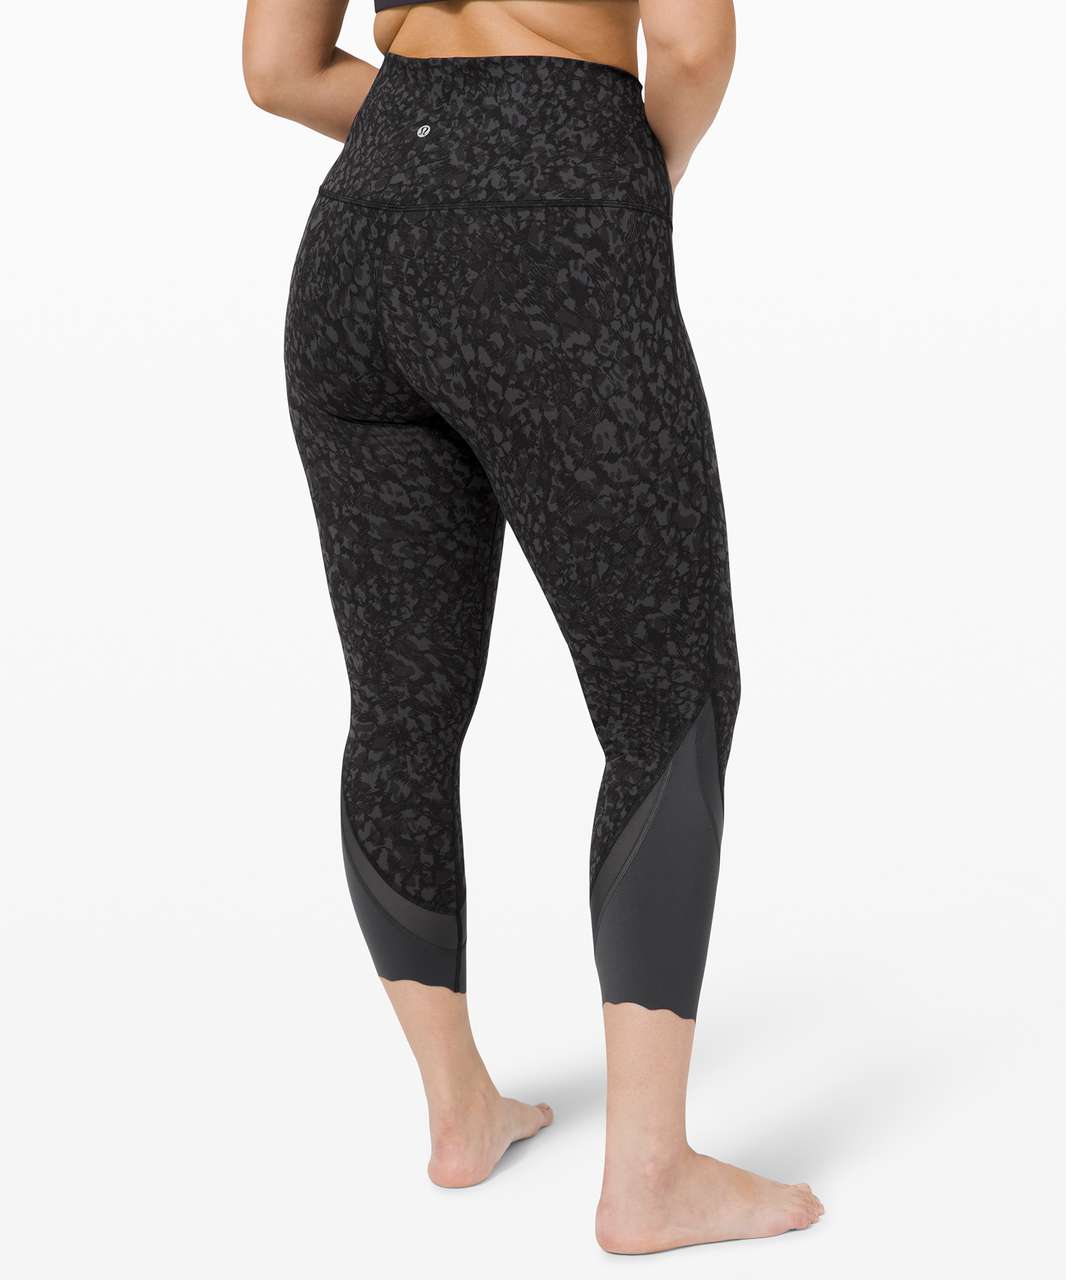 Lululemon Wunder Under High-Rise Crop 23" *Updated Scallop Full-On Luxtreme - Wild Thing Camo Deep Coal Multi